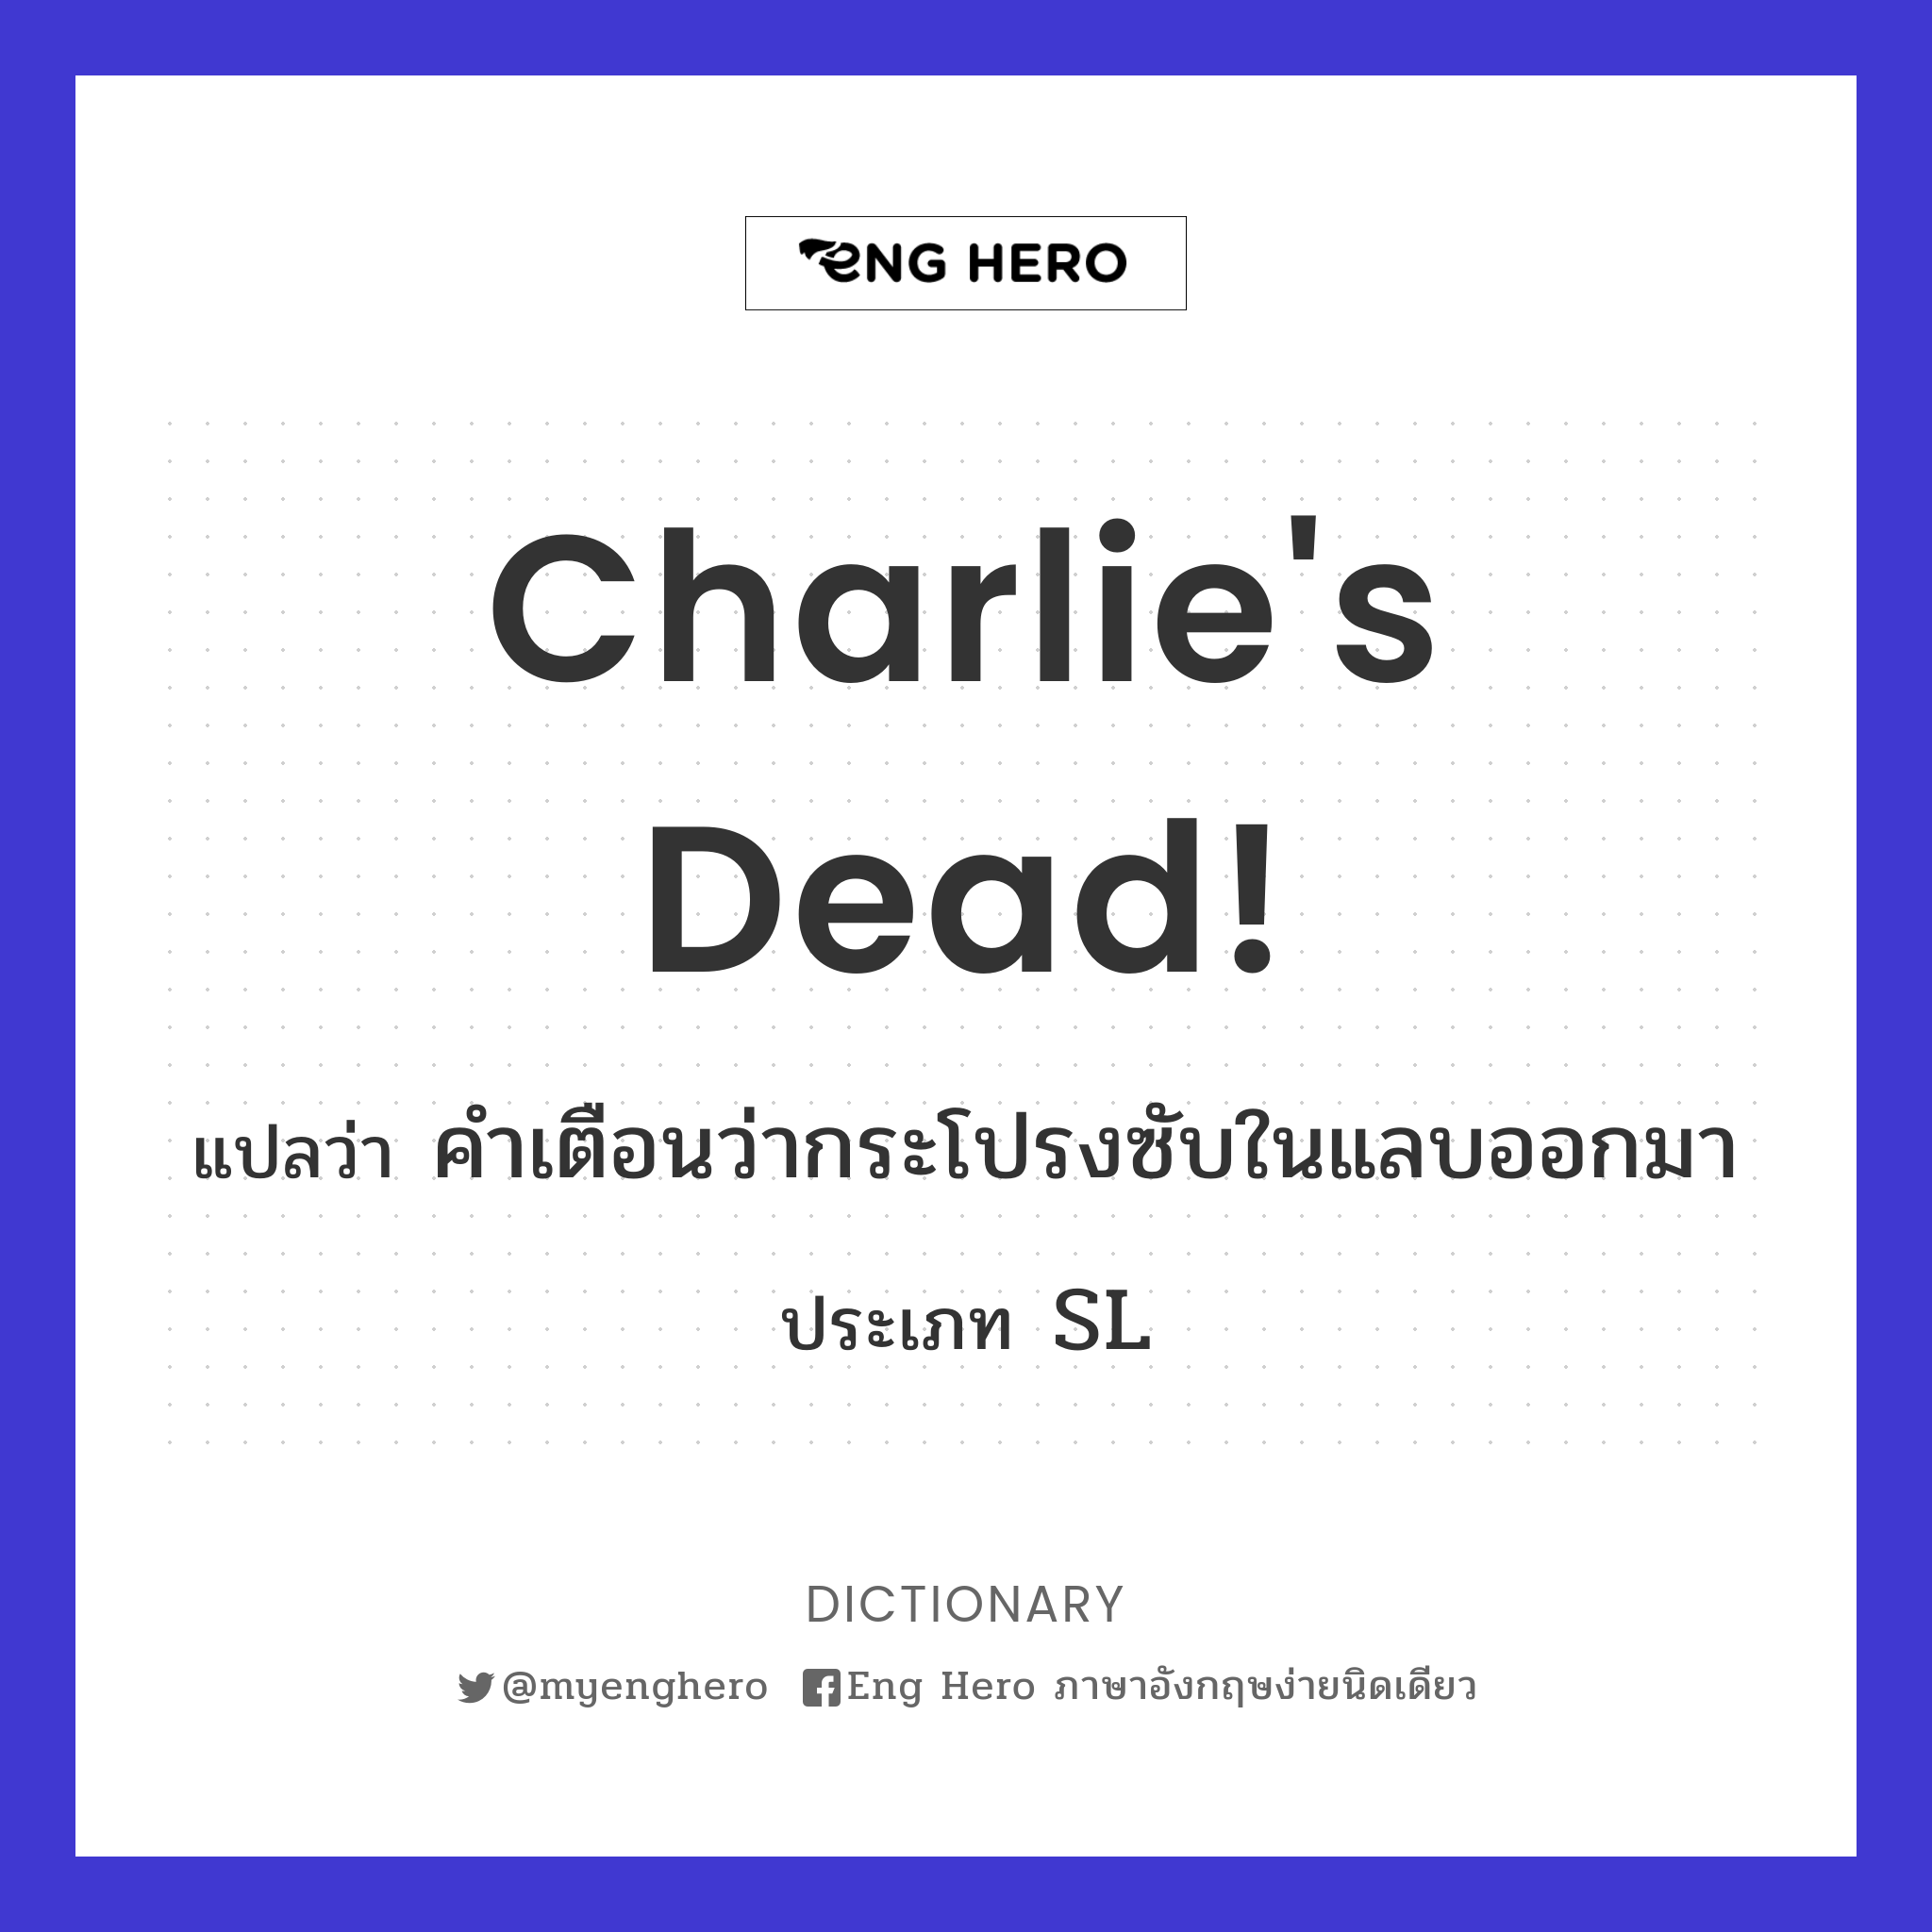 charlie's dead!